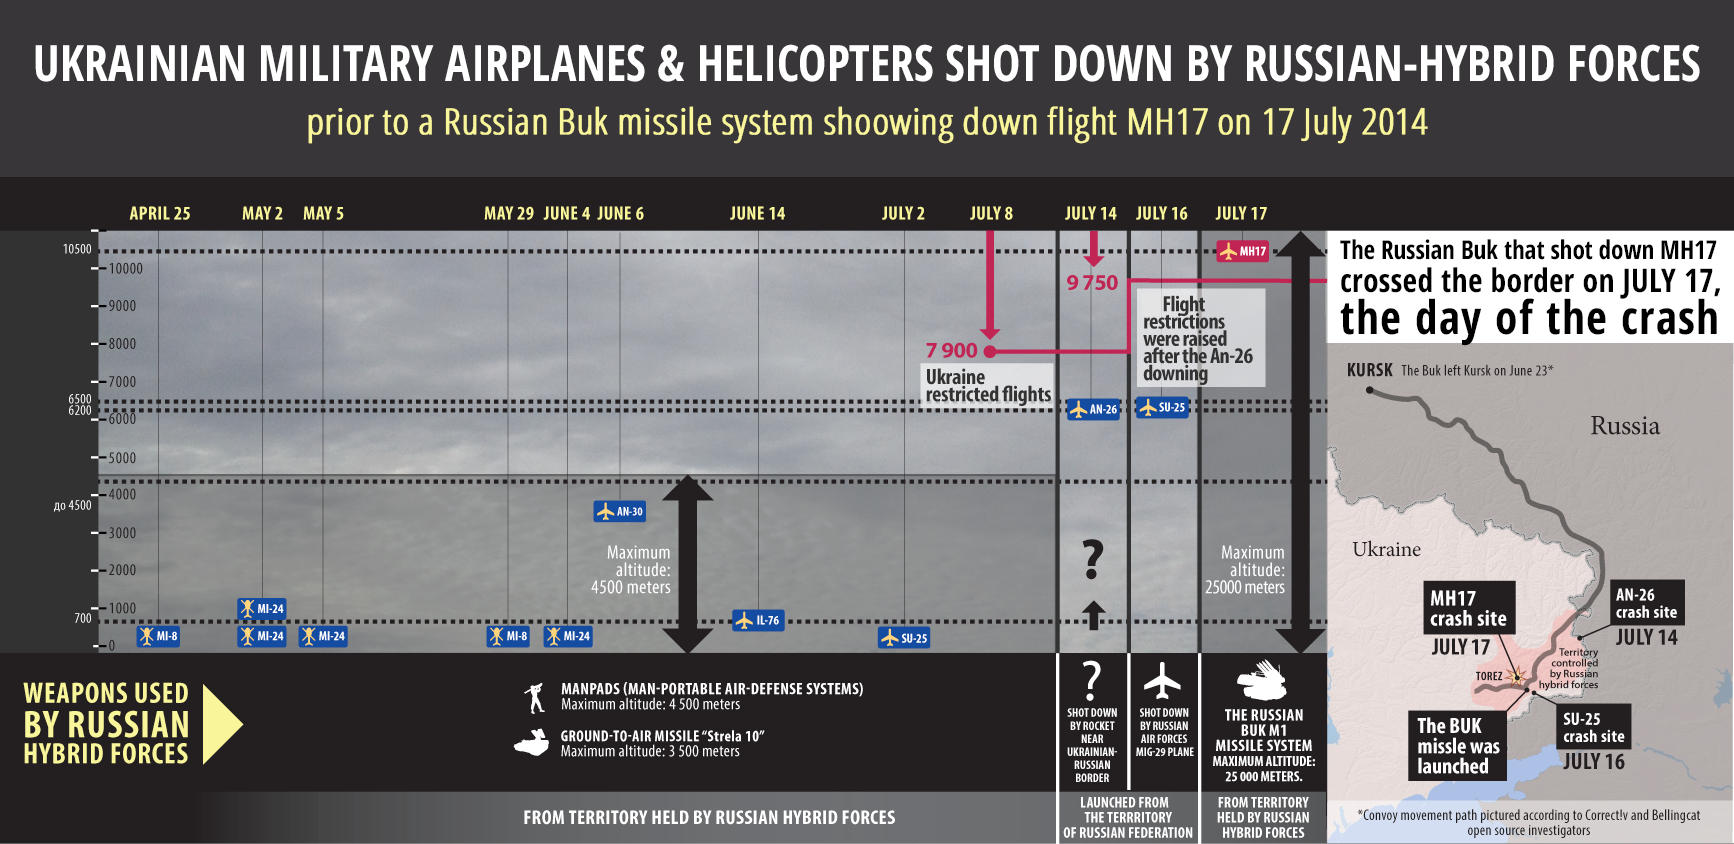 Many Ukrainian military planes and helicopters were downed by the Russian-hybrid forces above occupied Donbas prior to the downing of MH17. Graphic: Euromaidan Press ~